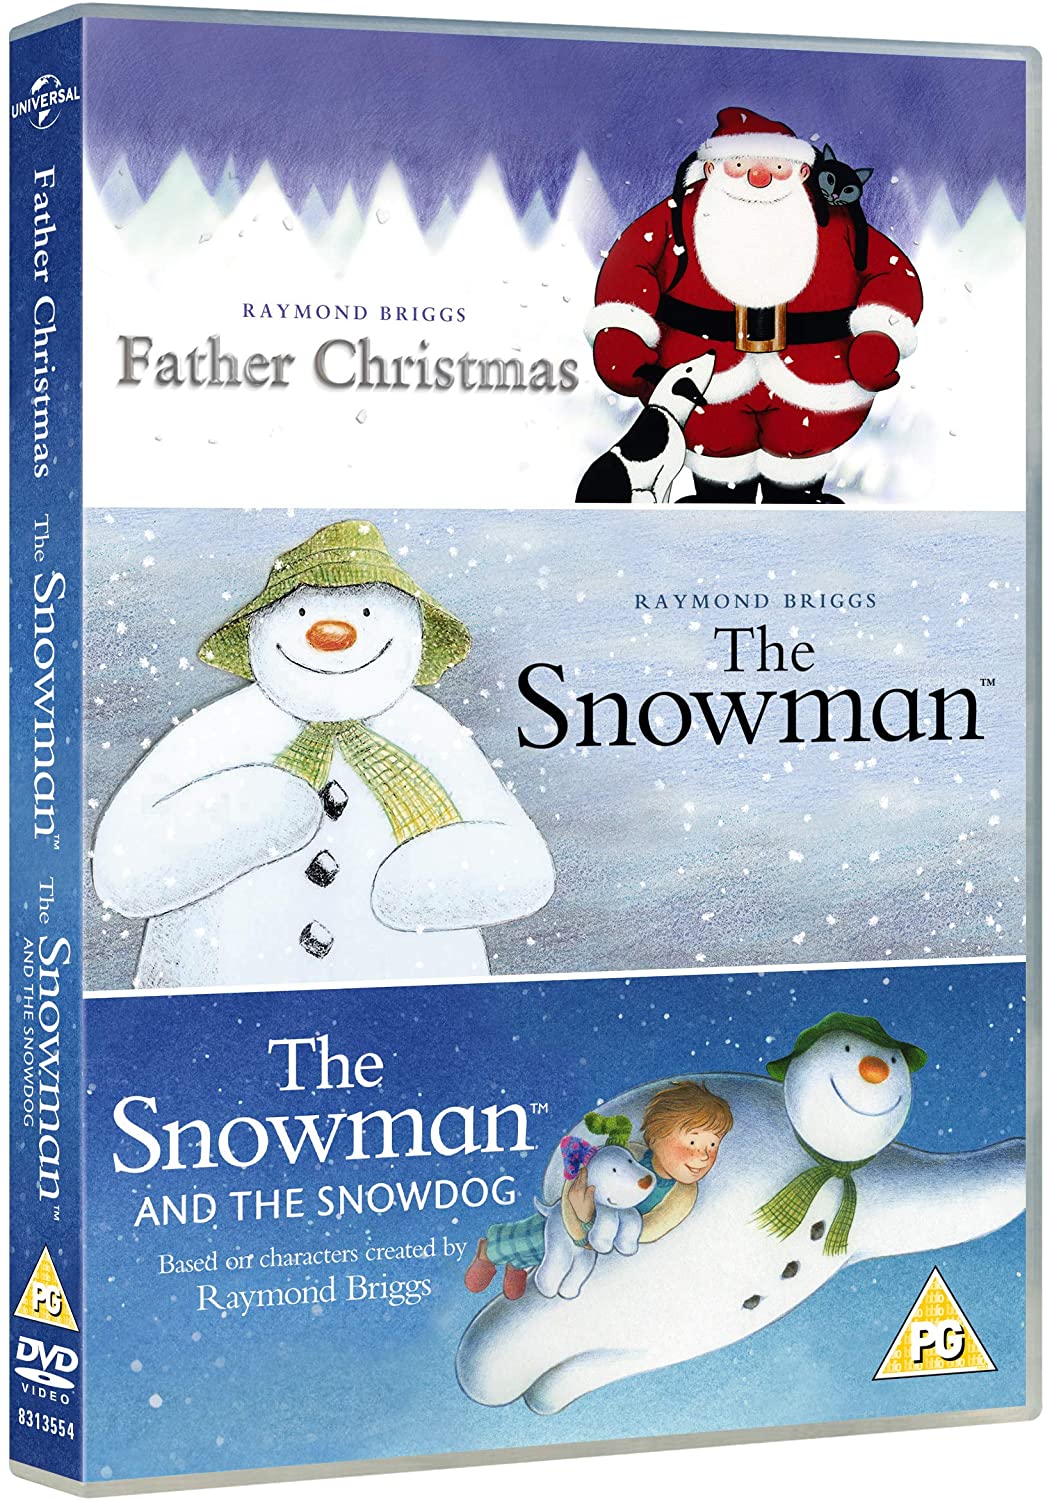 Father Christmas/The Snowman/The Snowman And The Snow Dog (DVD)